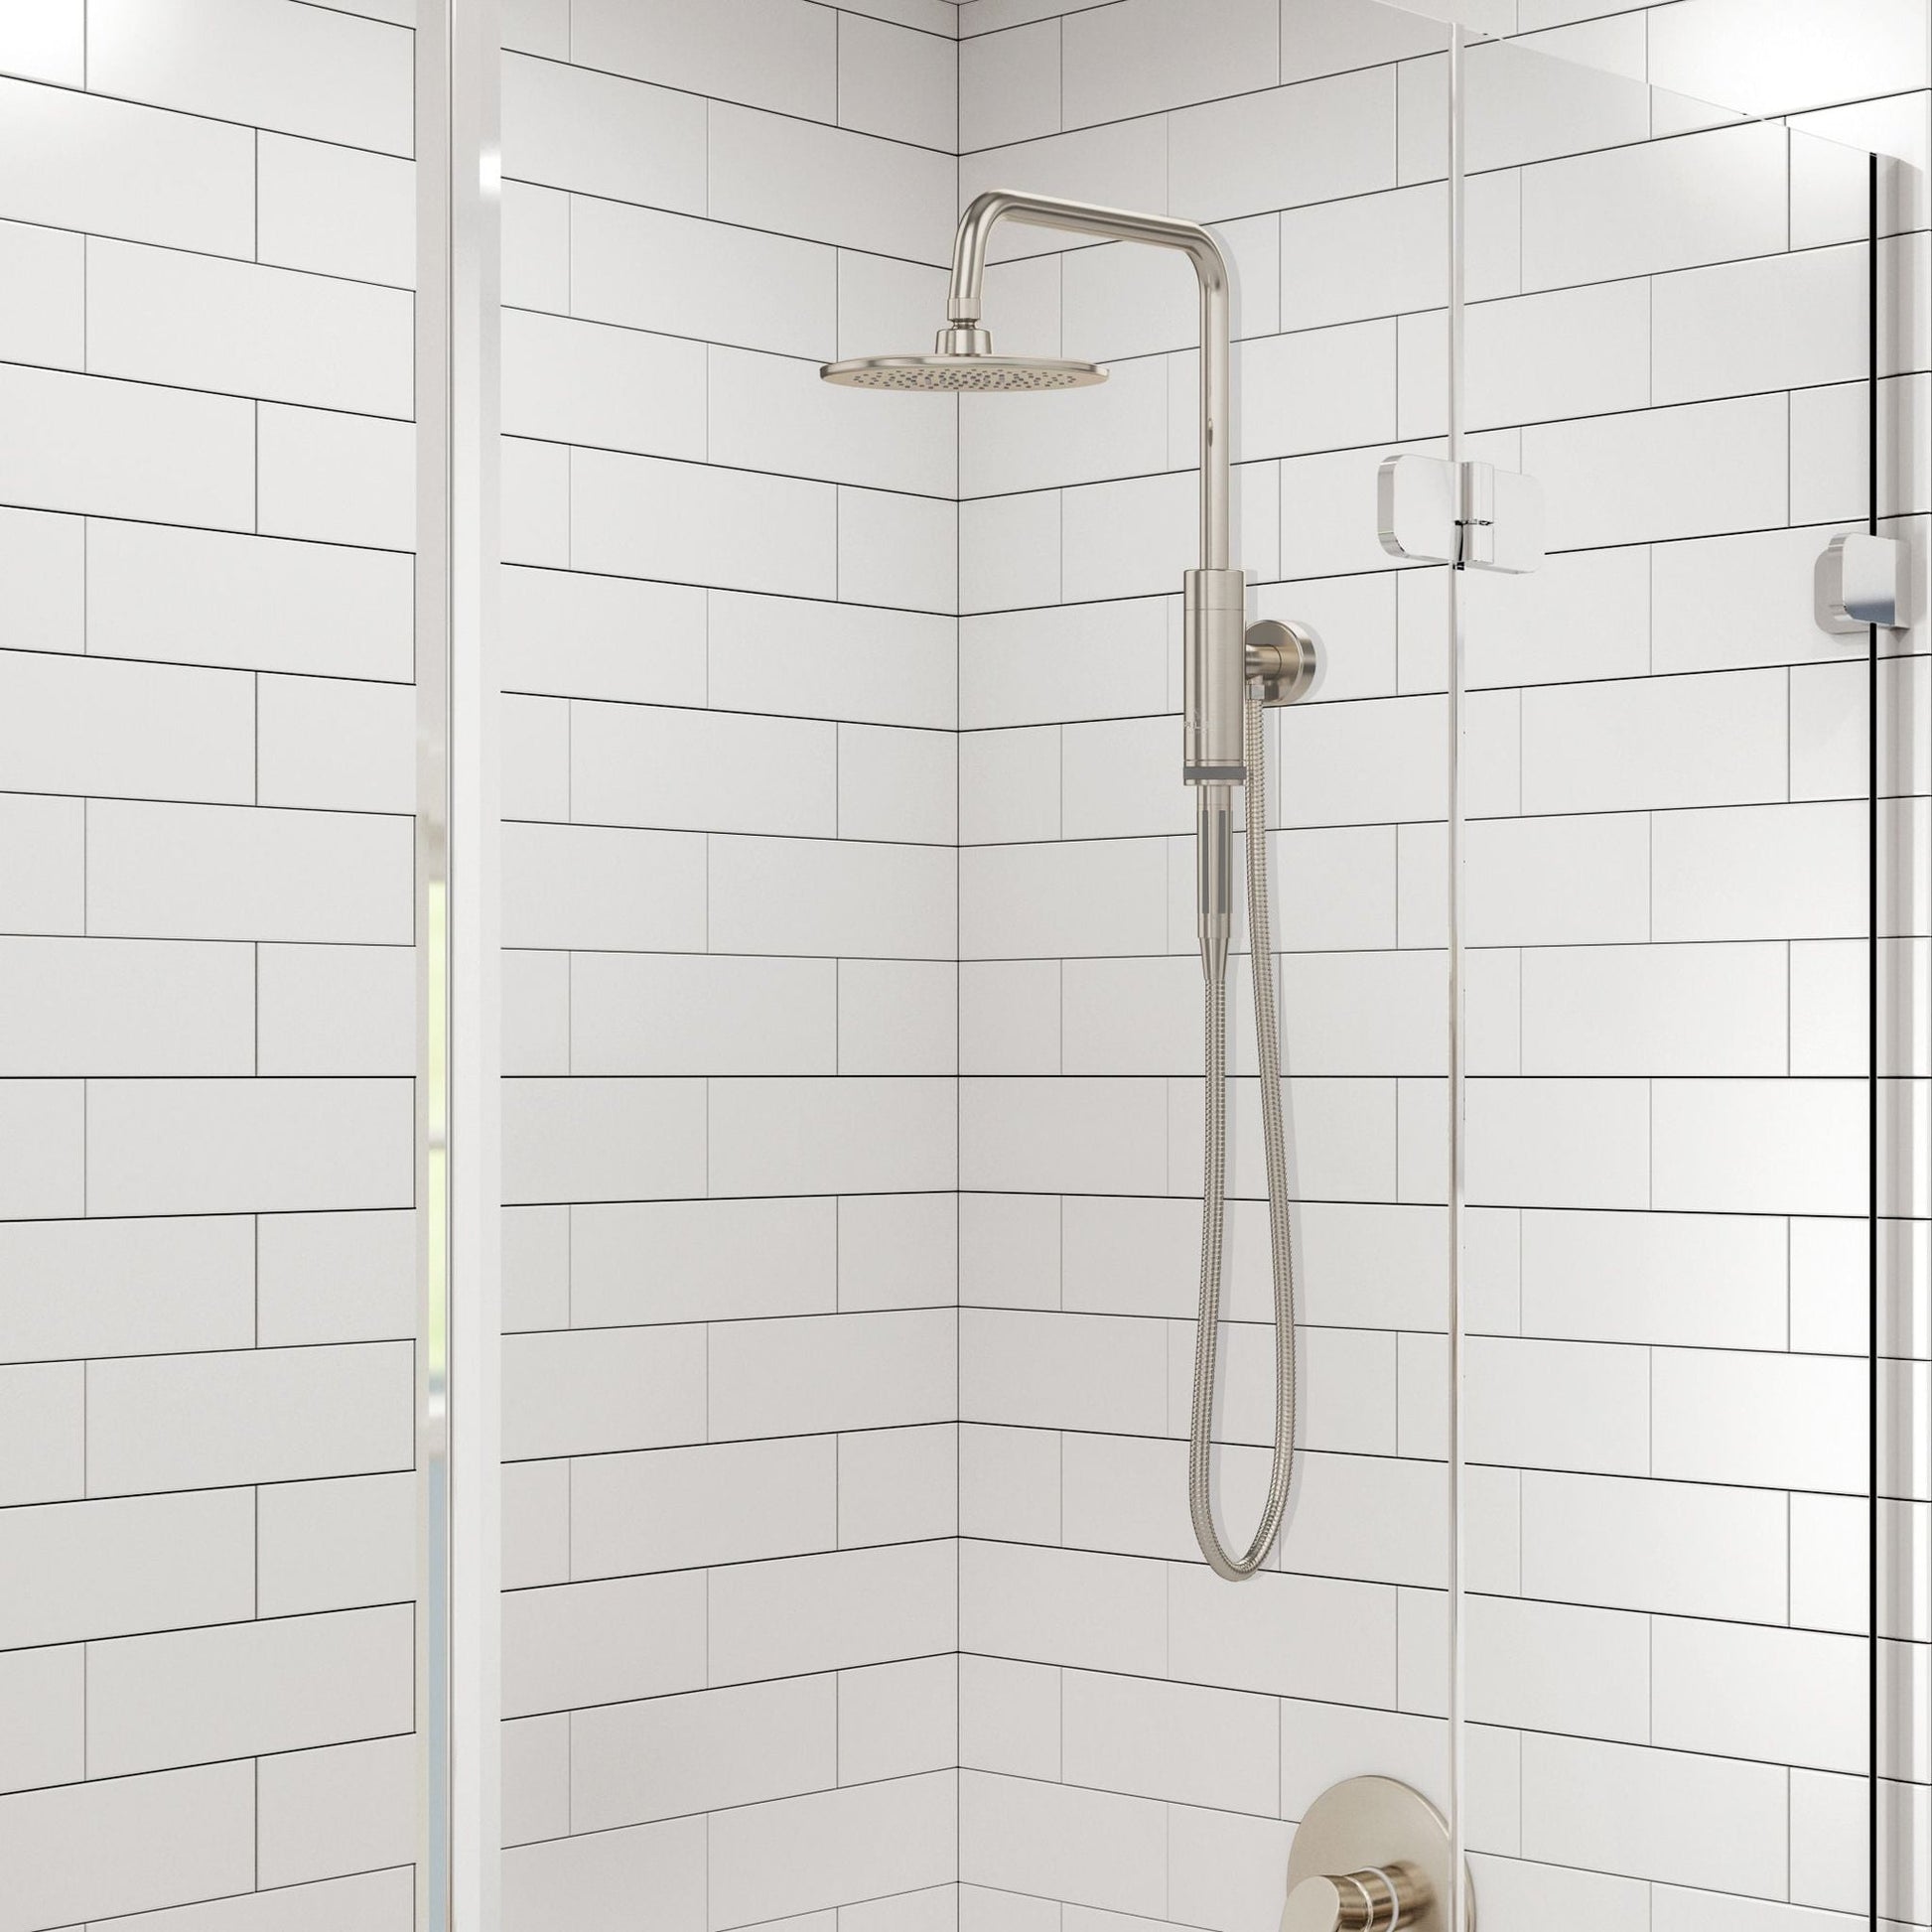 PULSE ShowerSpas Aquarius 2.5 GPM Shower System in Brushed Nickel Finish With Rain Shower Head and Single Function Hand Shower